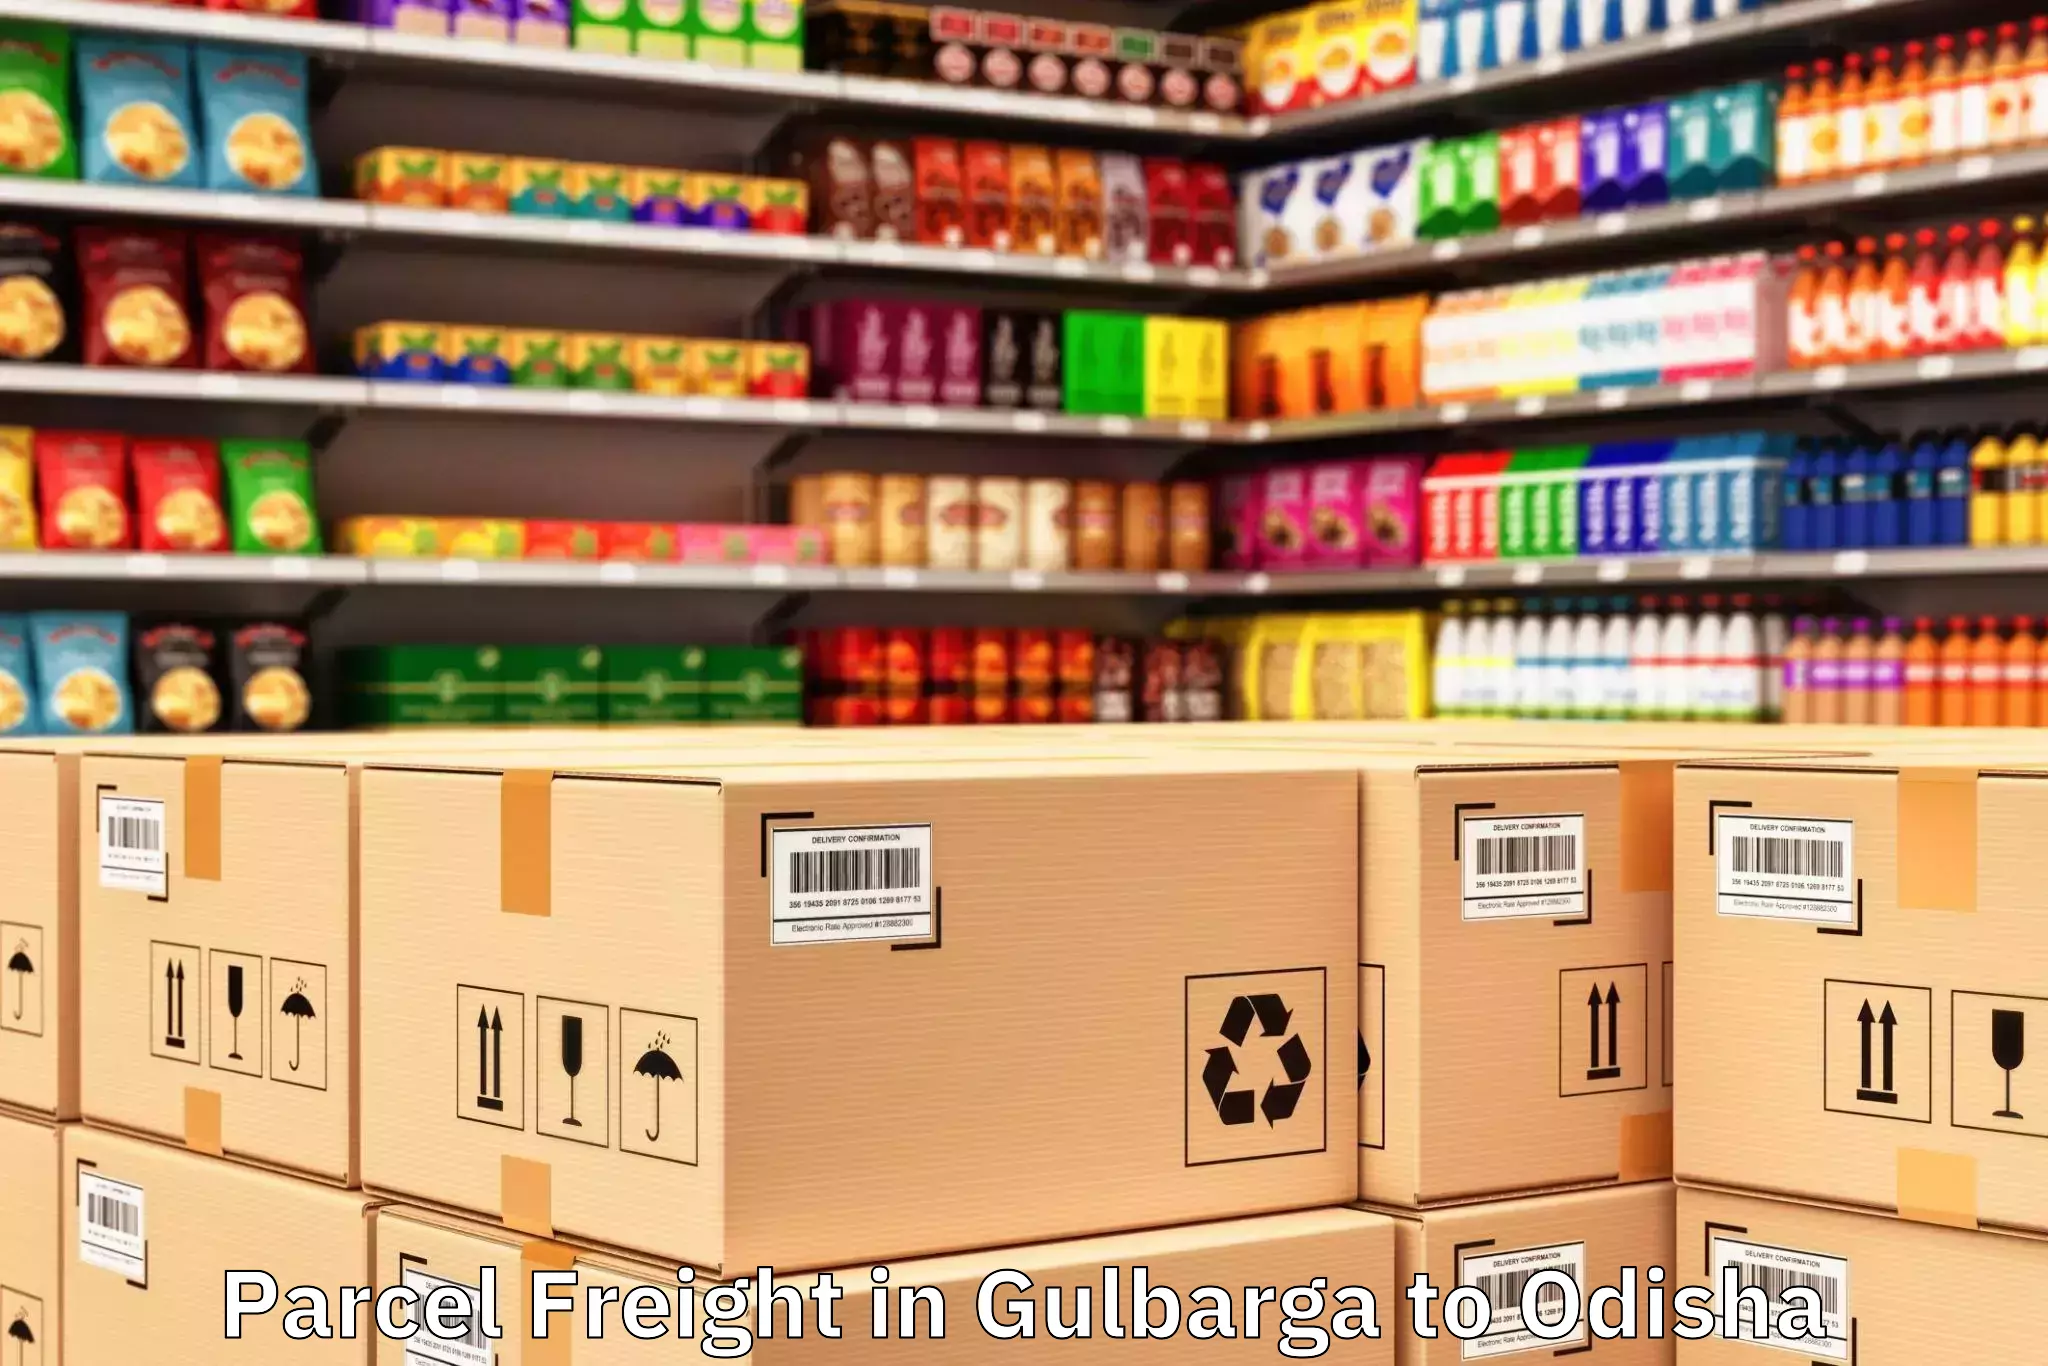 Top Gulbarga to Bahalda Parcel Freight Available